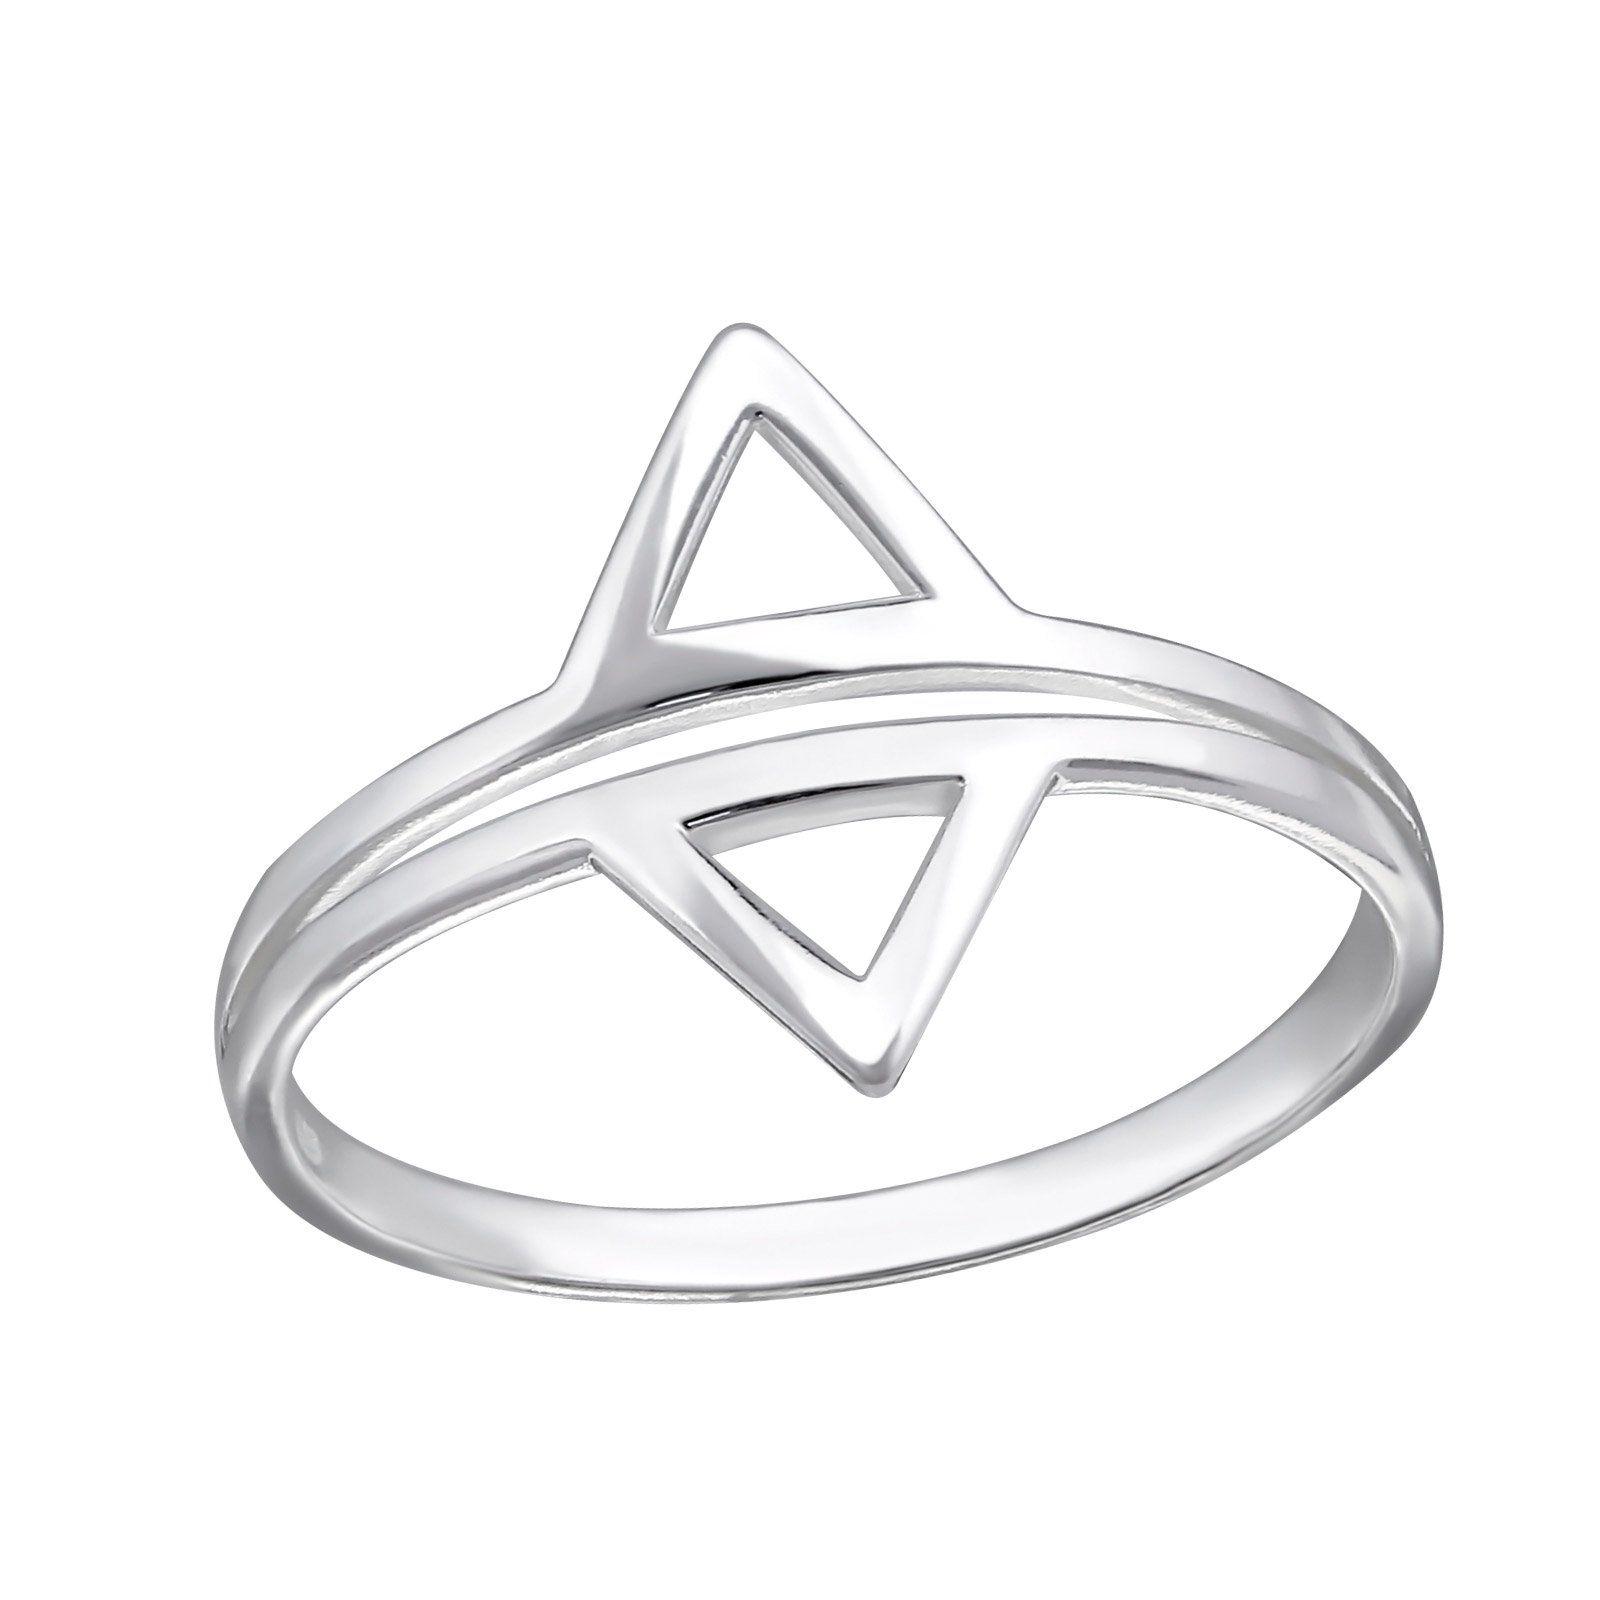 Silver Triangle Logo - Double Triangle Cut Out Sterling Silver Ring